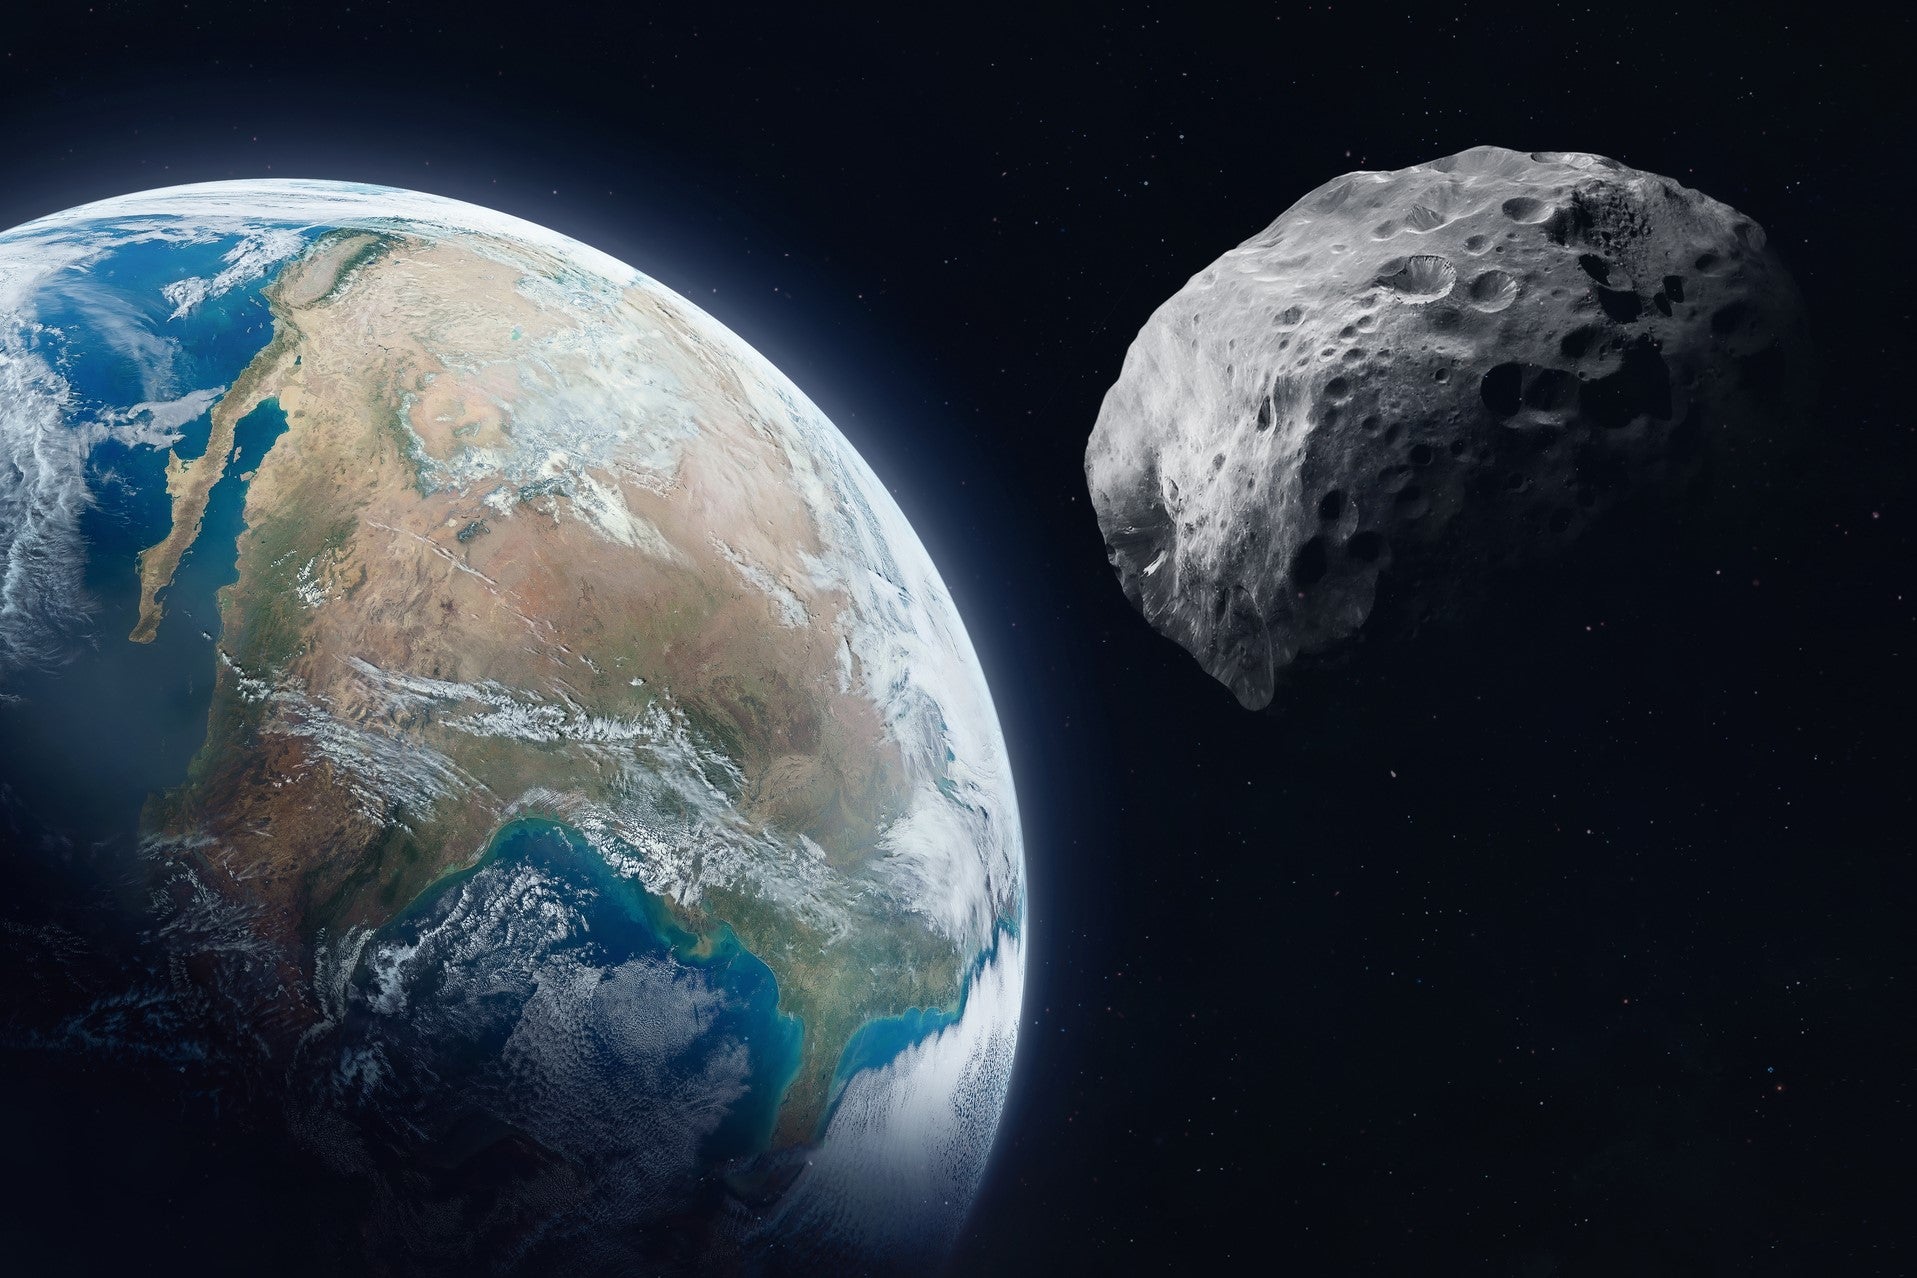 The ‘planet killer’ asteroid will pass safely past Earth just after 9pm BST on 27 June, 2024